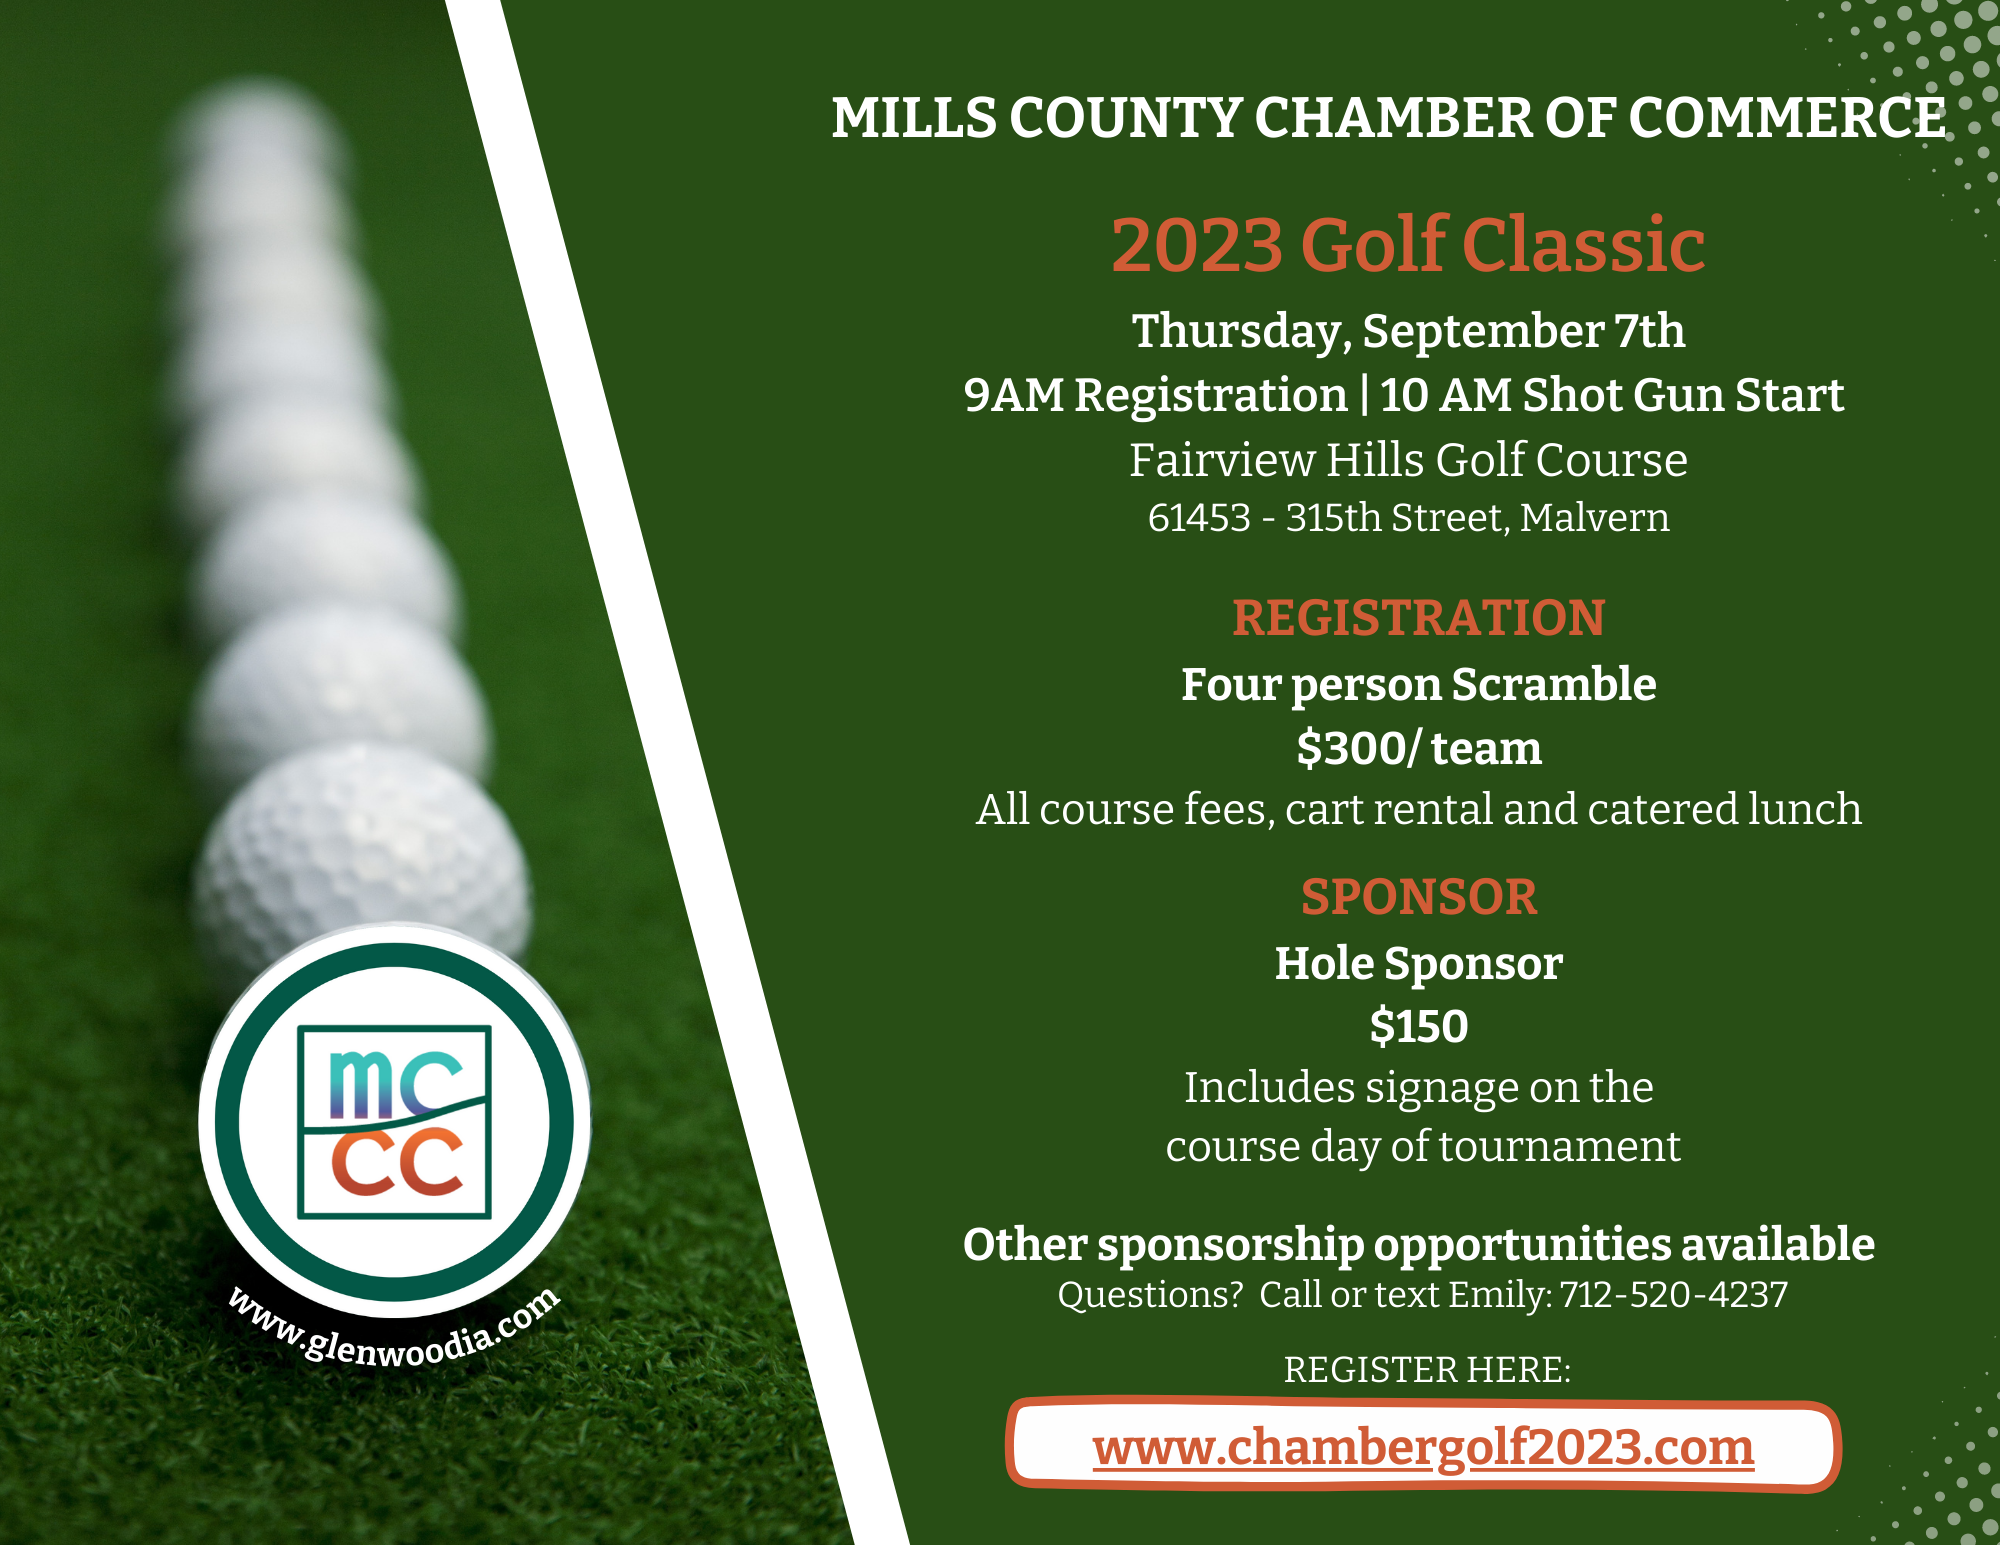 2023 Mills County Chamber of Commerce Golf Classic